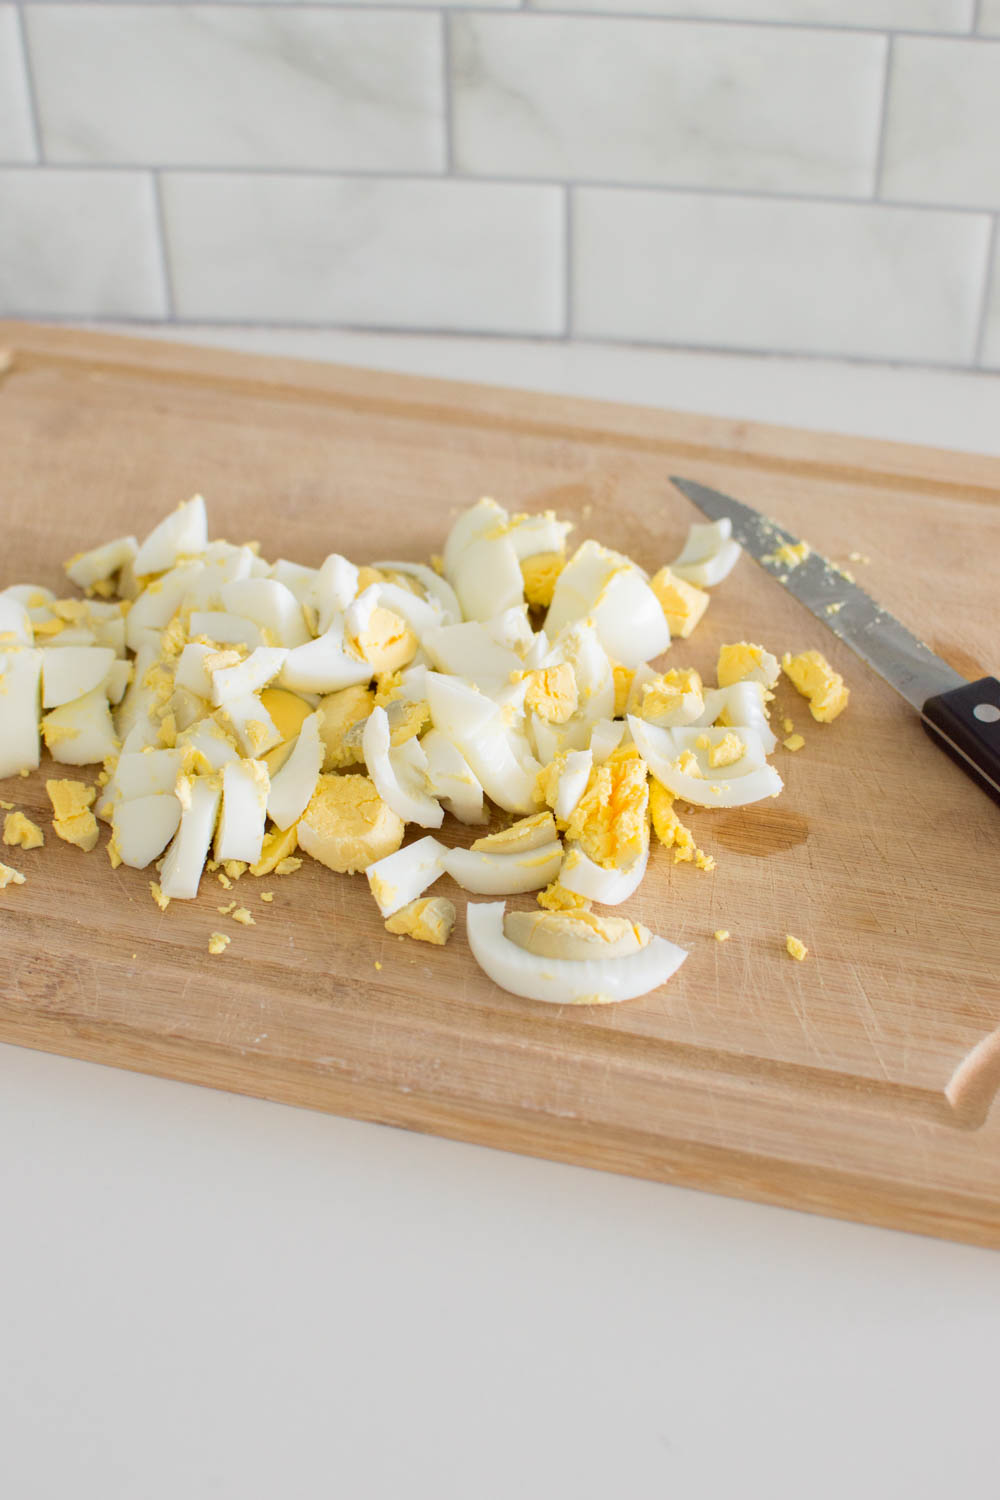 Hard boiled egg being chopped from on a wooden cutting board